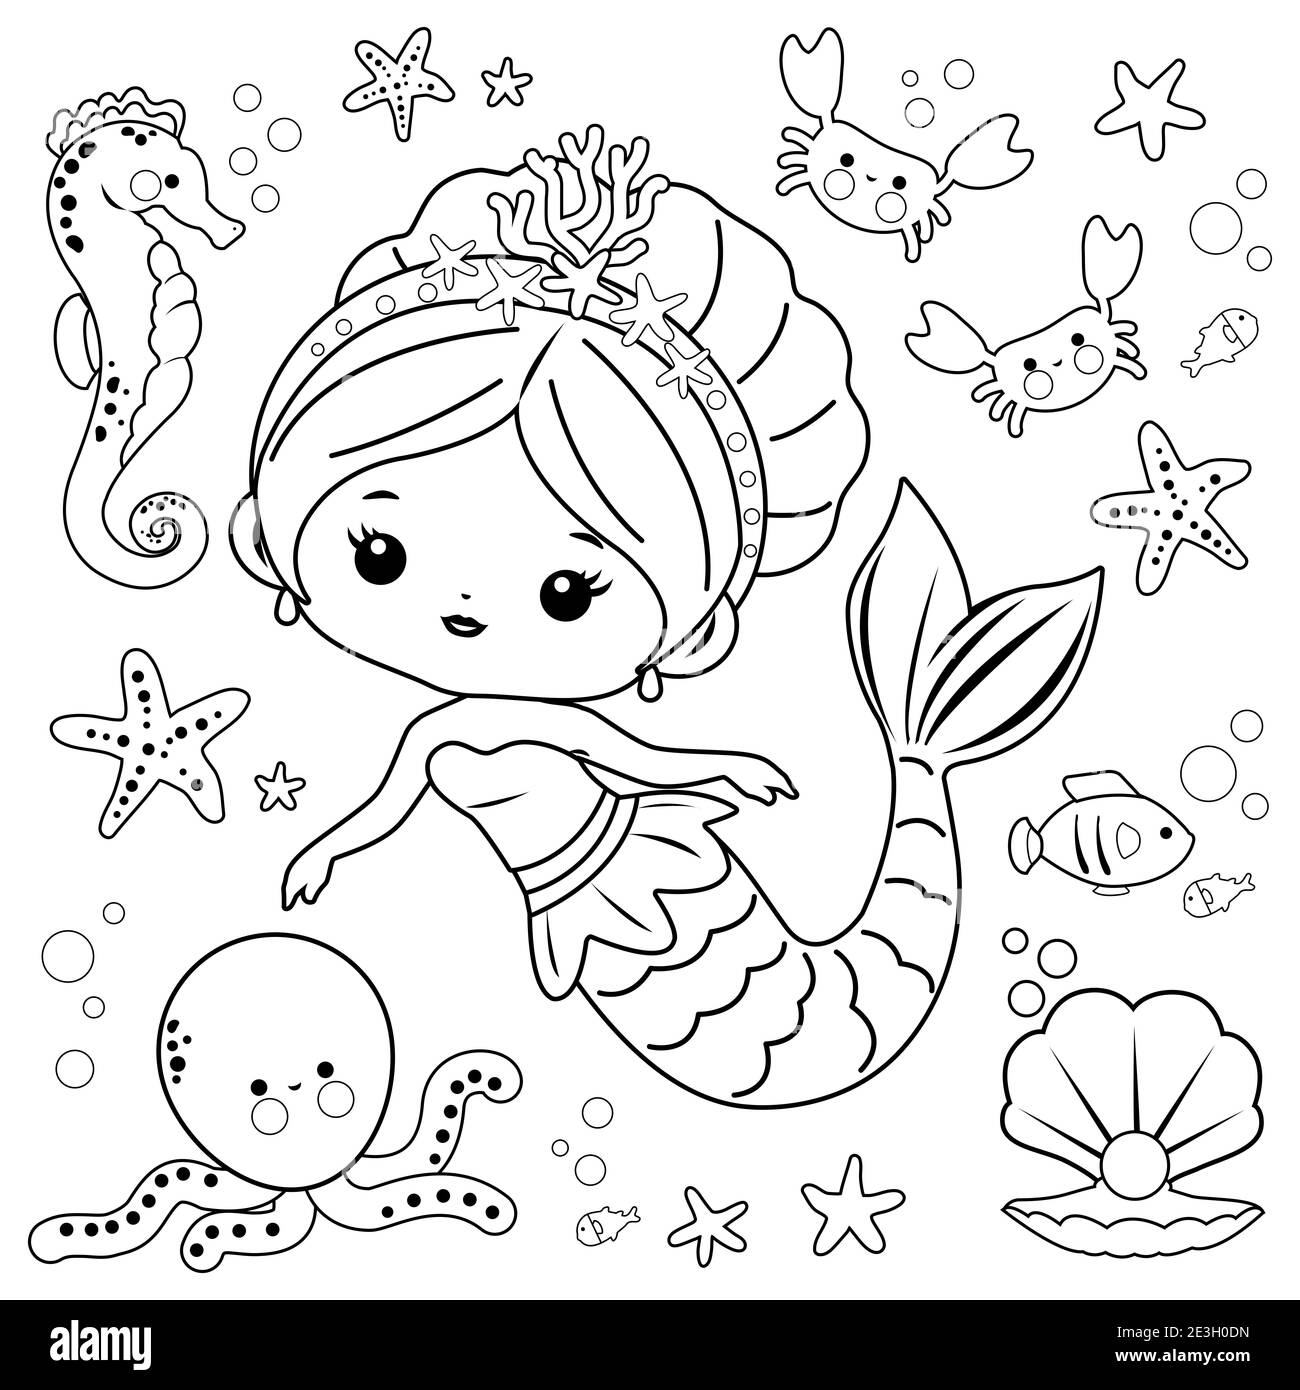 Anime Coloring Pages  Mermaid Anime Coloring Page and Kids Activity sheet   HonkingDonkey